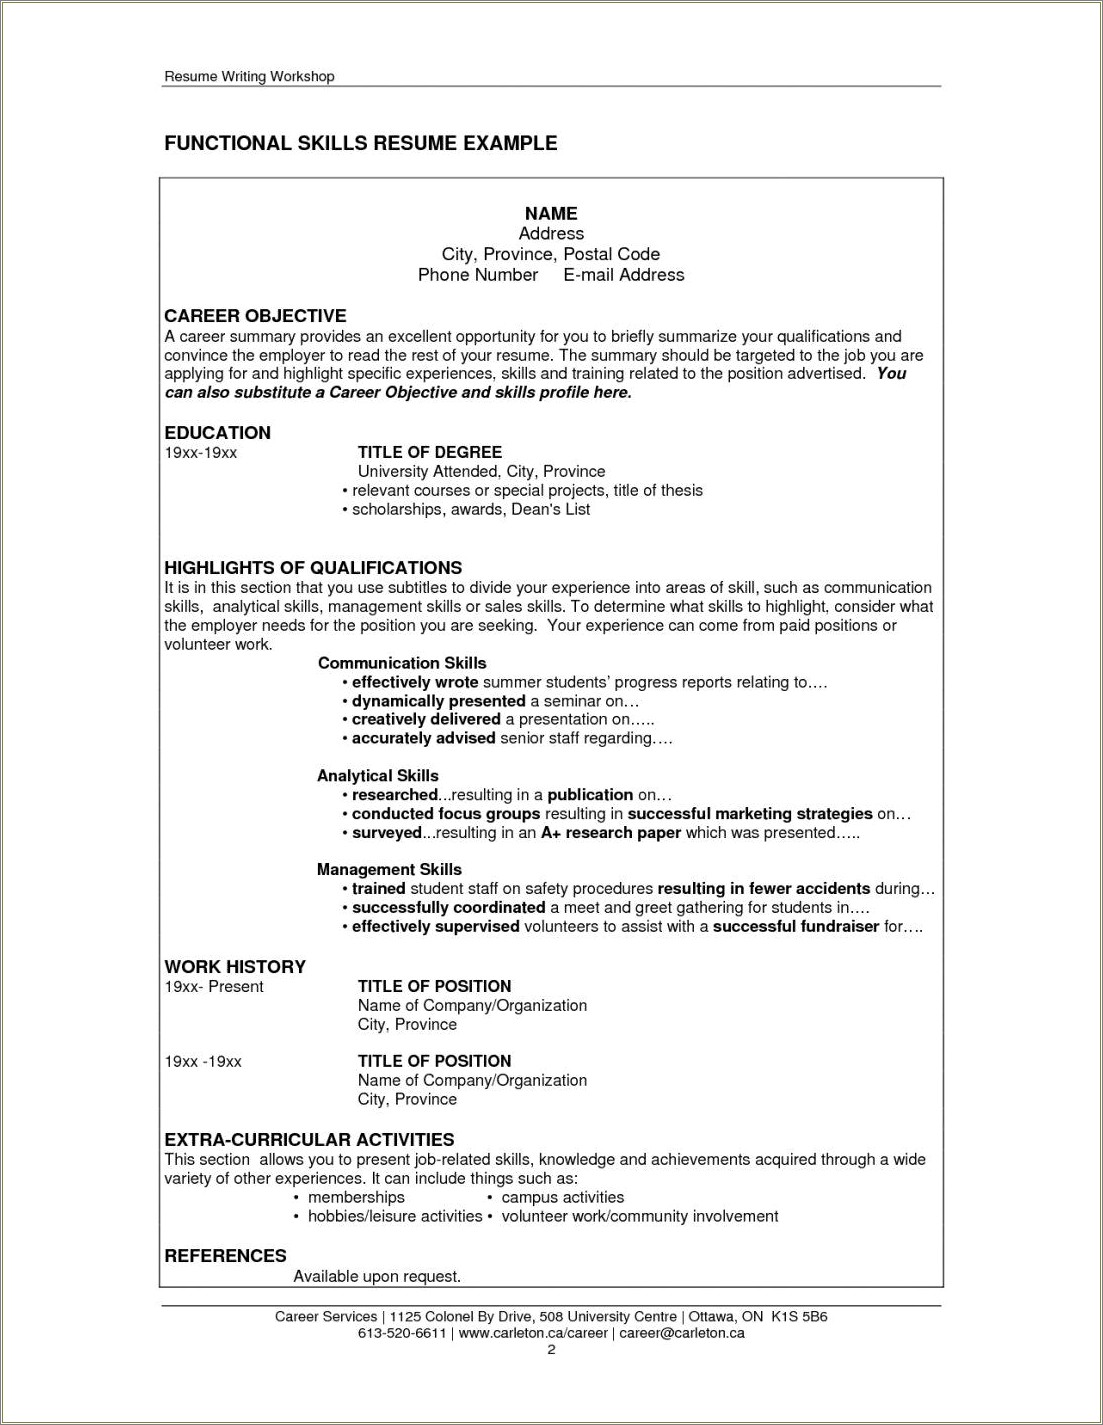 Resume Sample With Qualifications And Skills